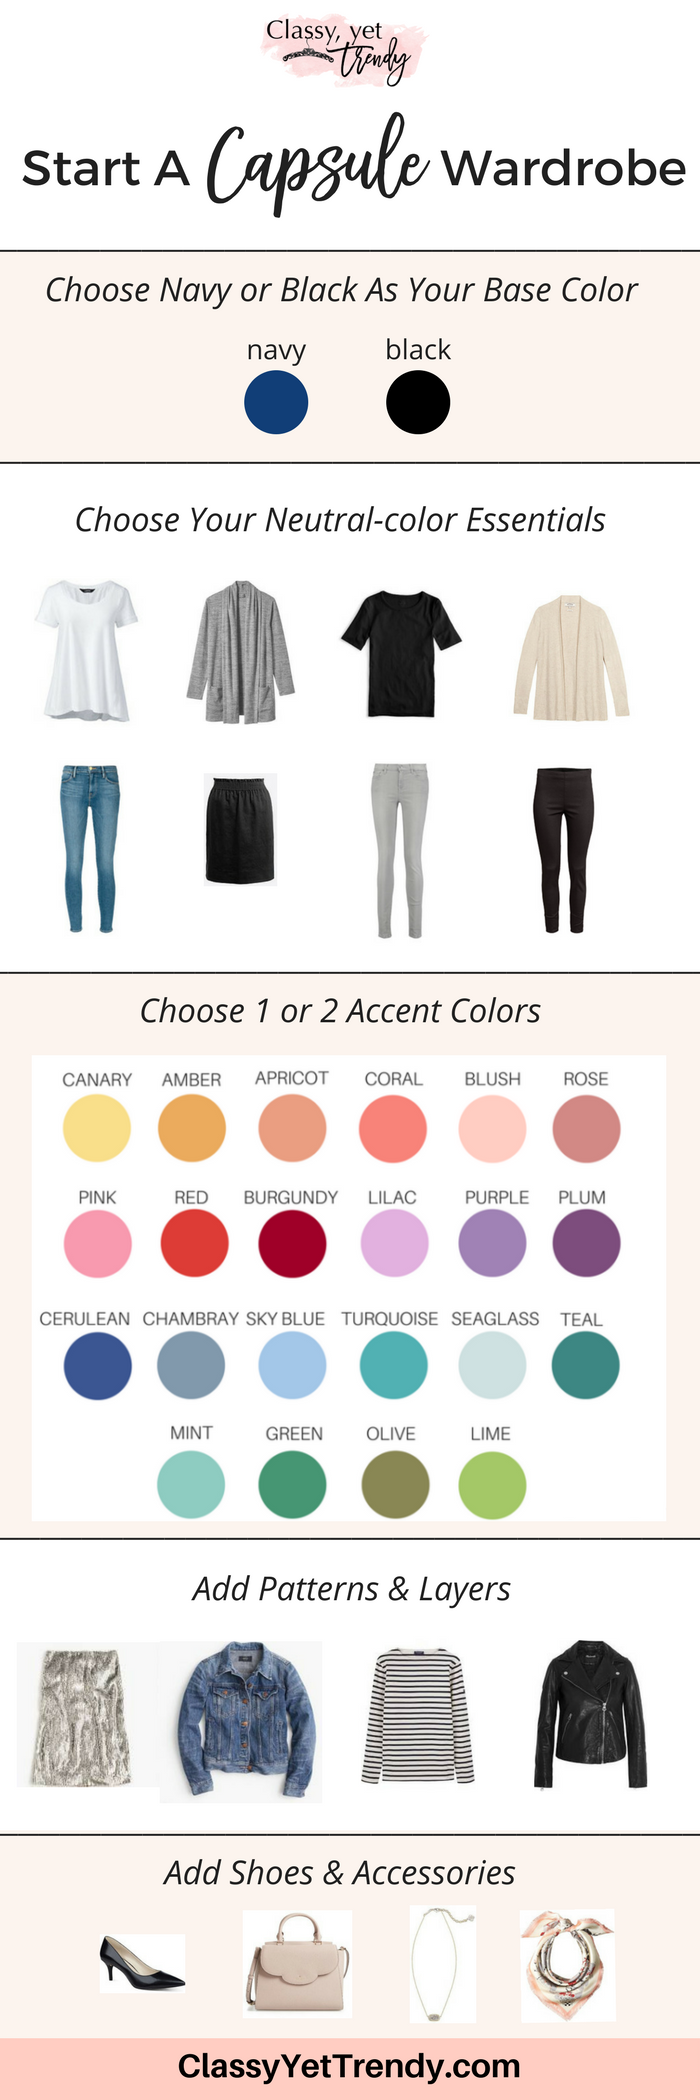 How To Start A Capsule Wardrobe (with Colors & Patterns): 5 Step